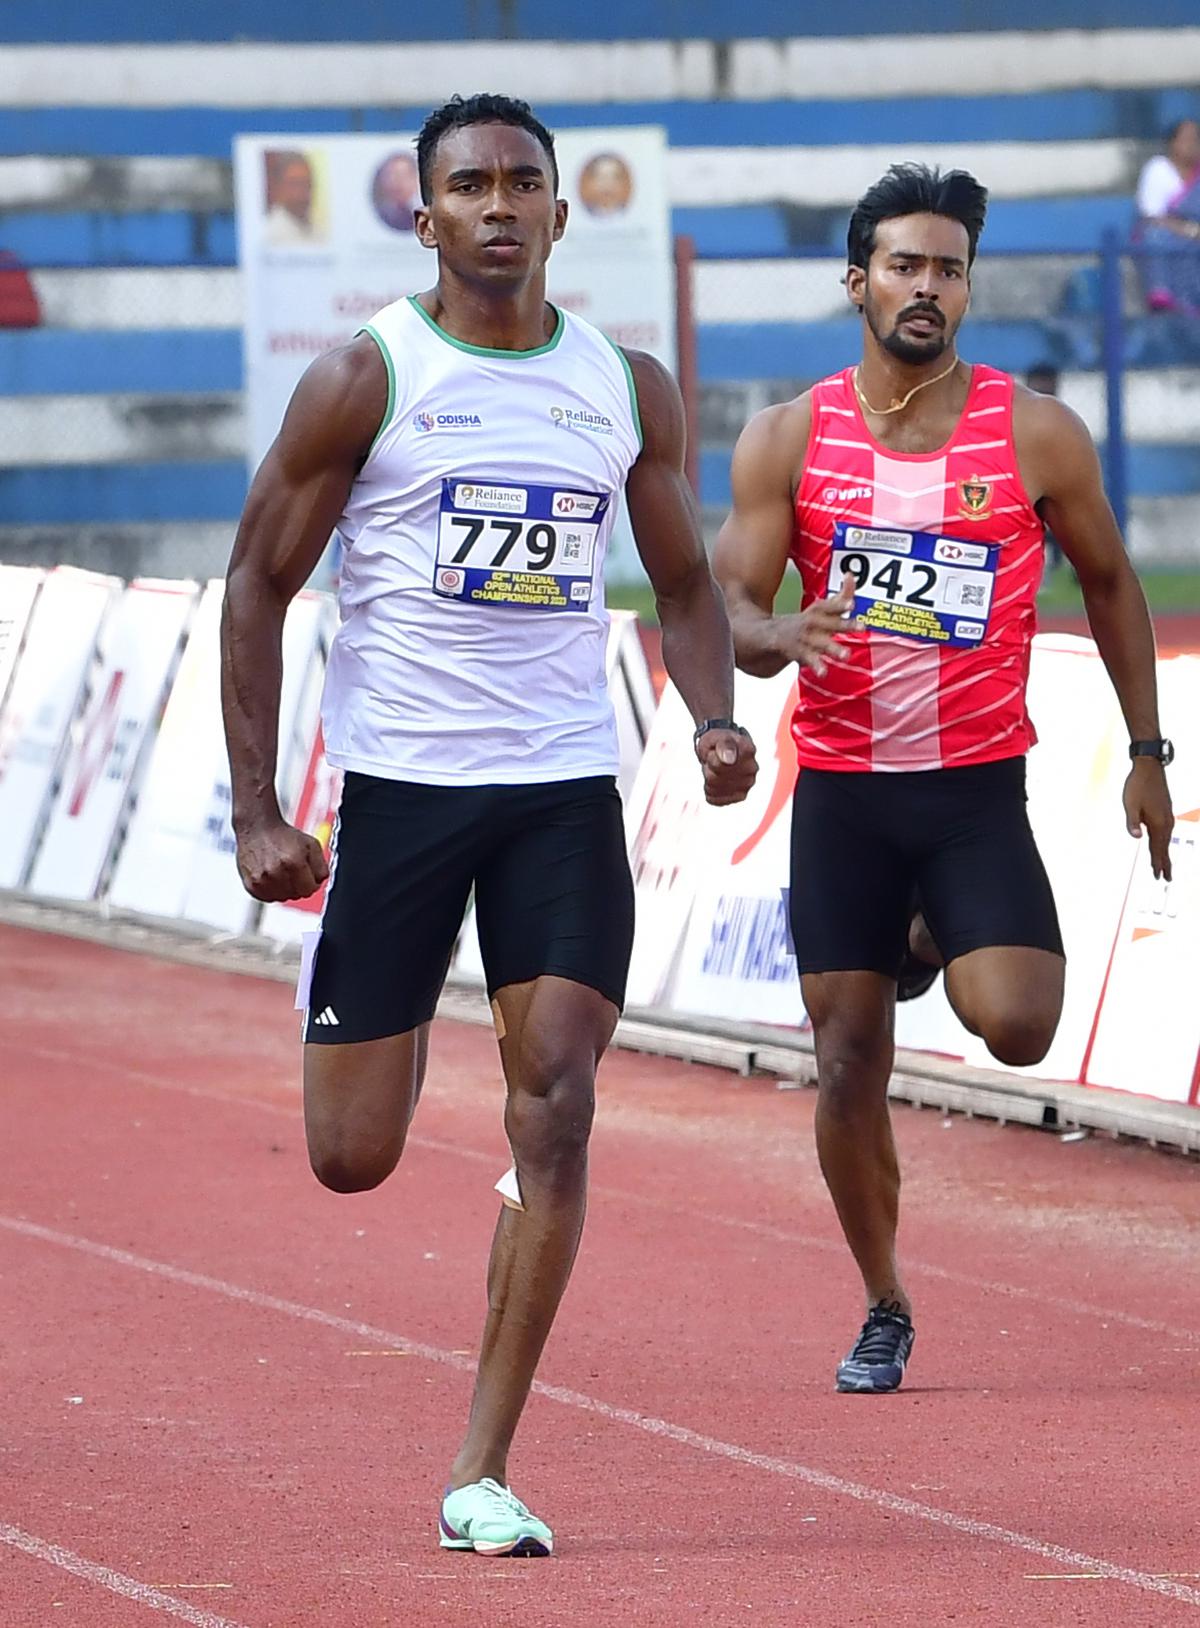 Animesh Kajur of Odisha sprinting to a new meet record in the 200m at the 62nd National Open athletics championships at Sree Kanteerava Stadium in Bengaluru on October 14.